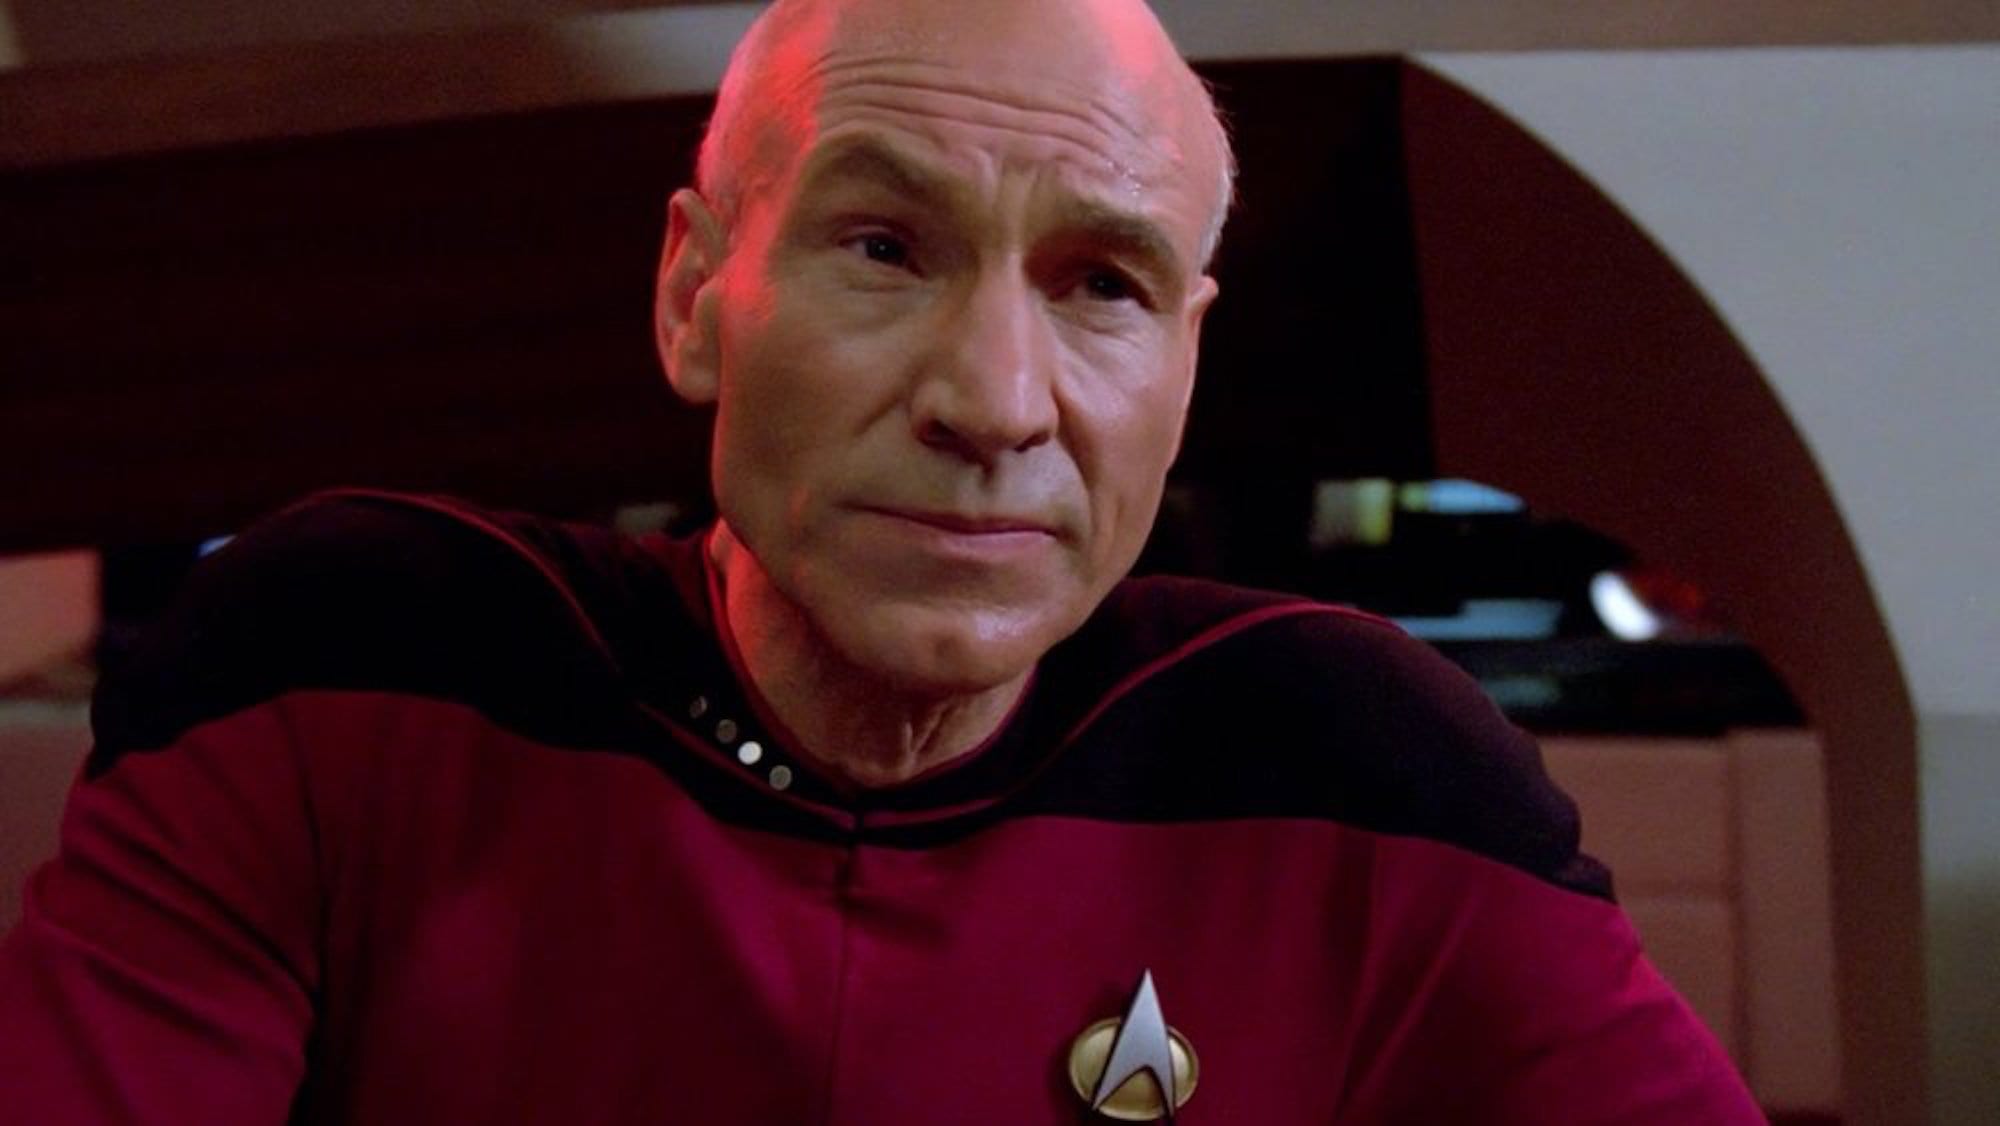 "Earl Grey, hot": Here are all the best moments of the legendary Patrick Stewart in his role as Captain Jean-Luc Picard in 'Star Trek: The Next Generation'.